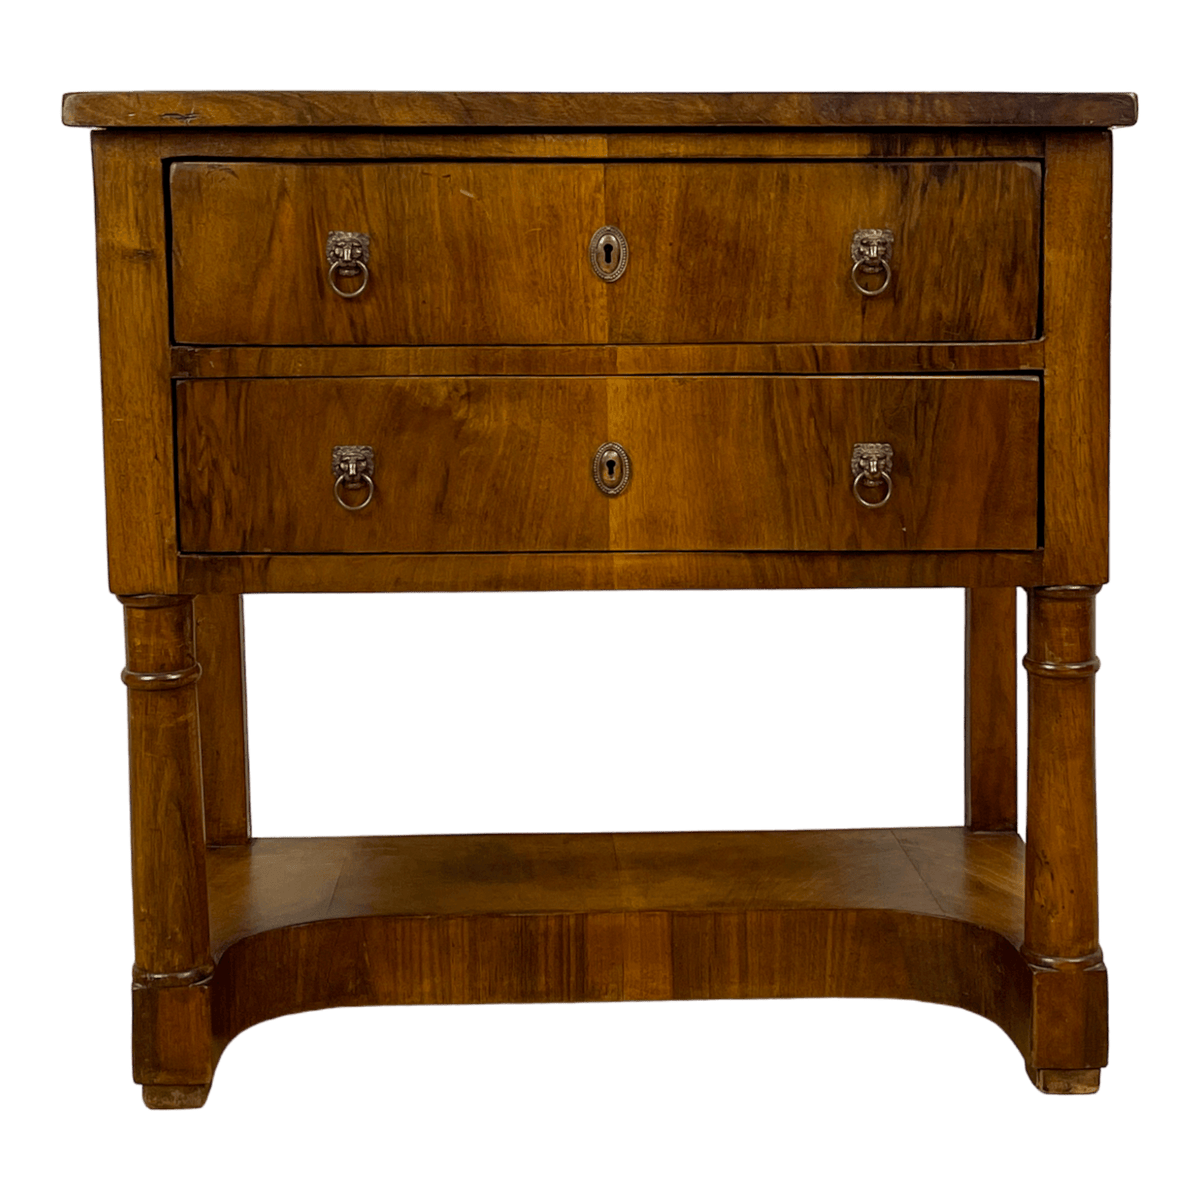 Empire side table